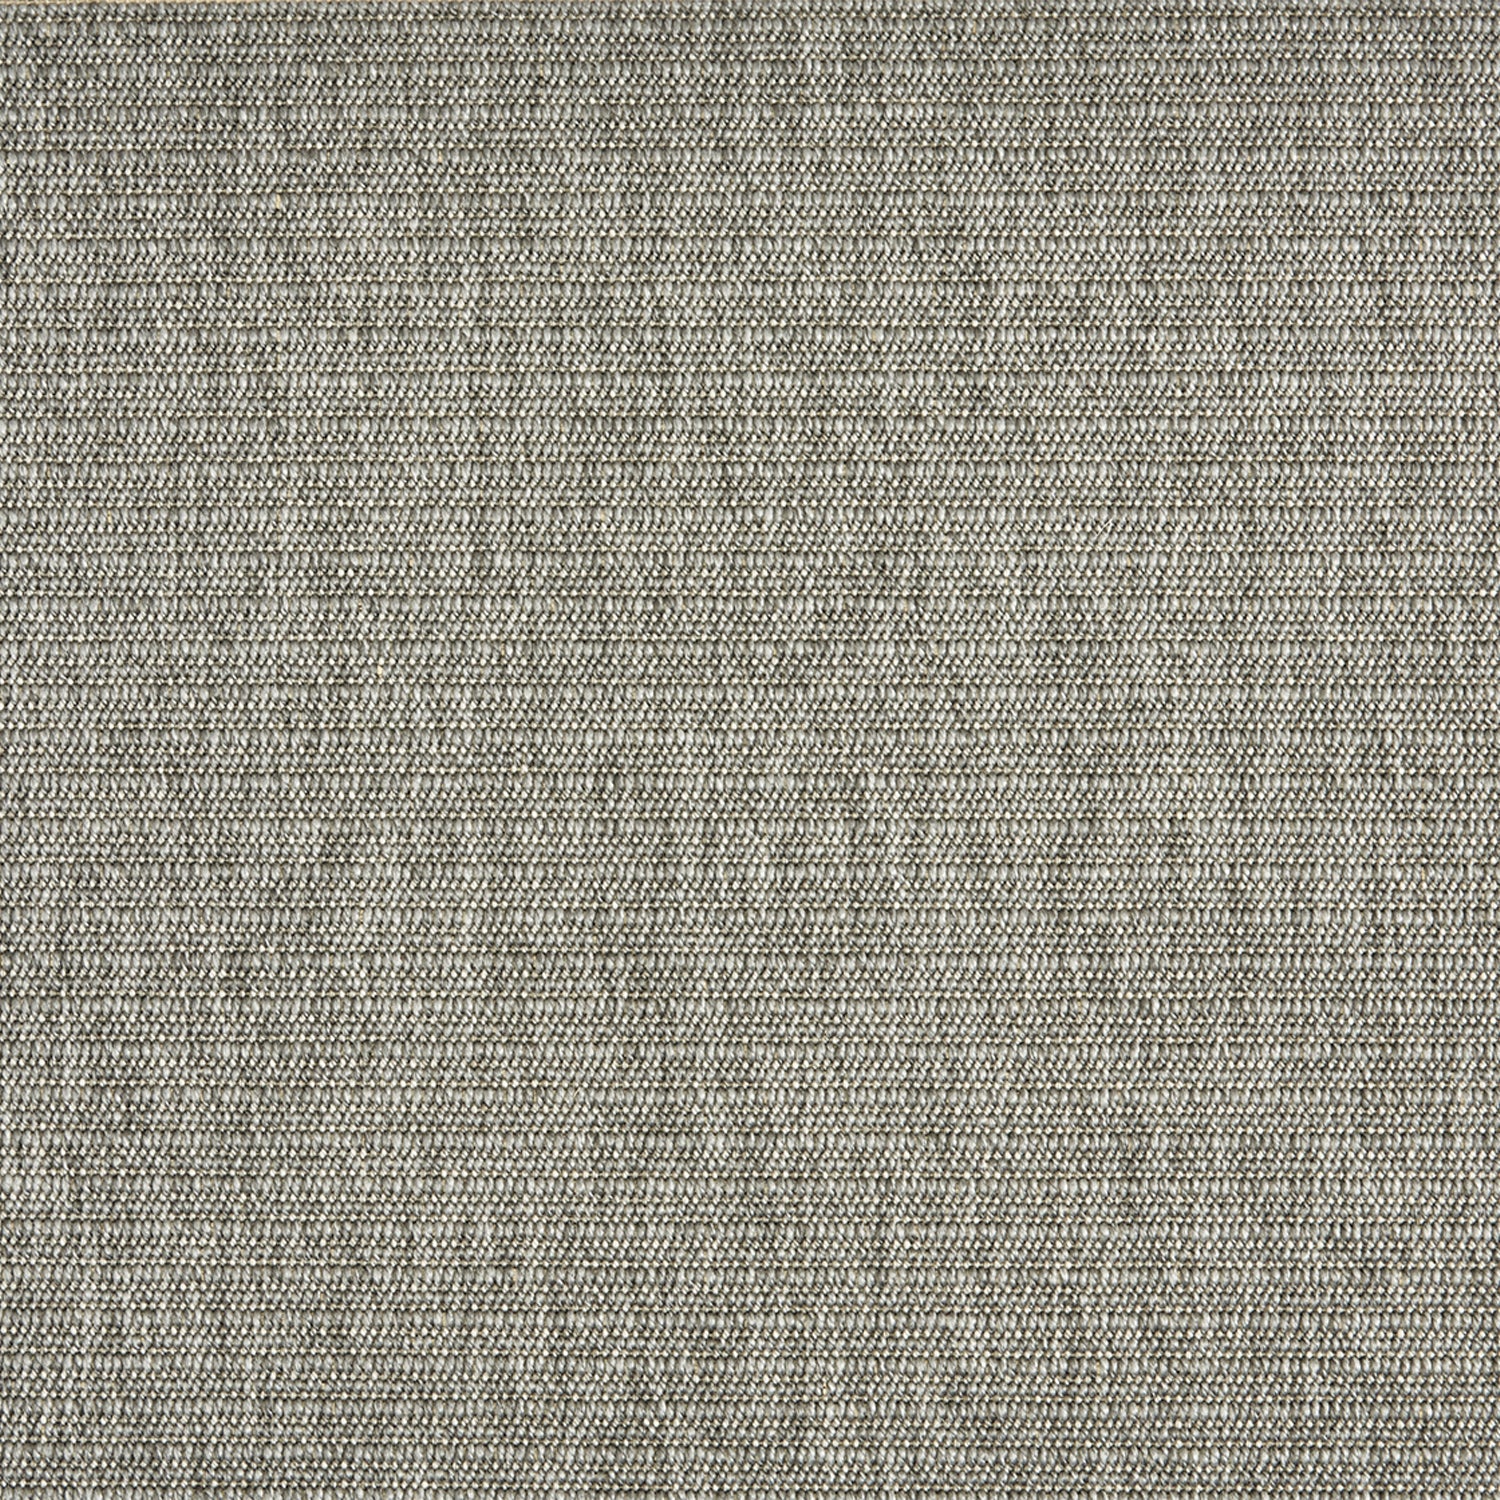 Outdoor broadloom carpet swatch in a ribbed flat weave in mottled gray and silver.